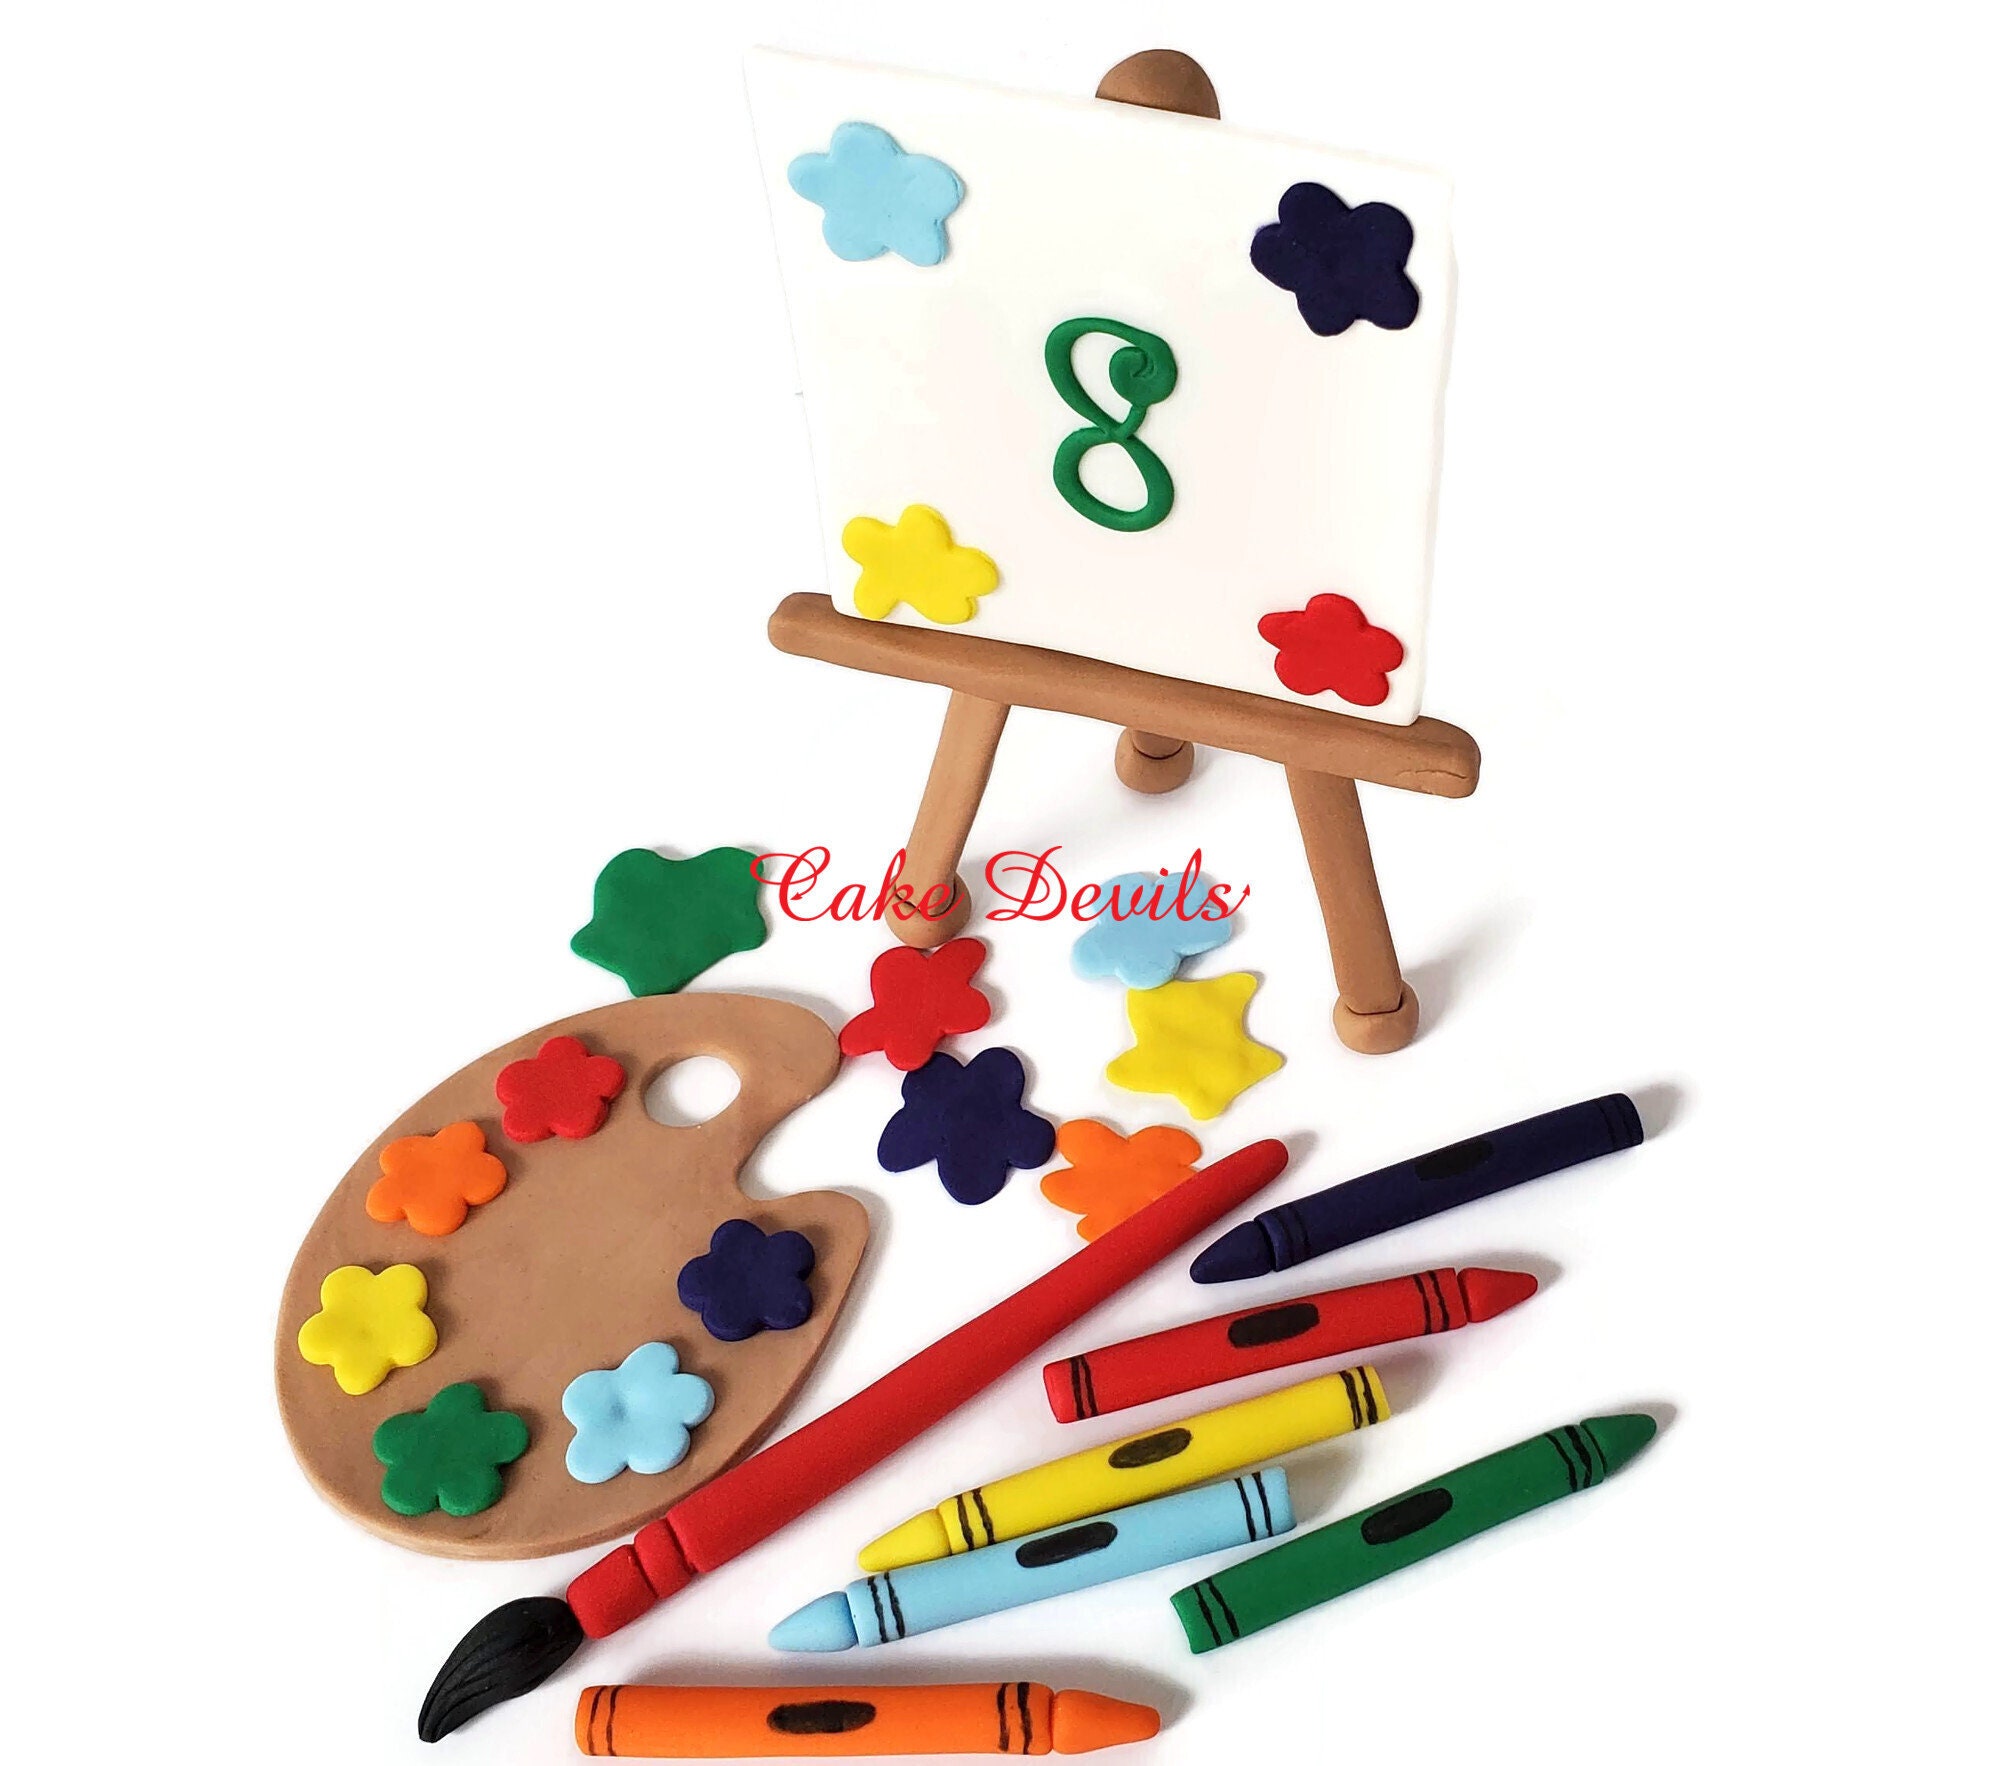 Paint Bucket Fondant Cake with Edible Paint Brush and Number - B0460 –  Circo's Pastry Shop